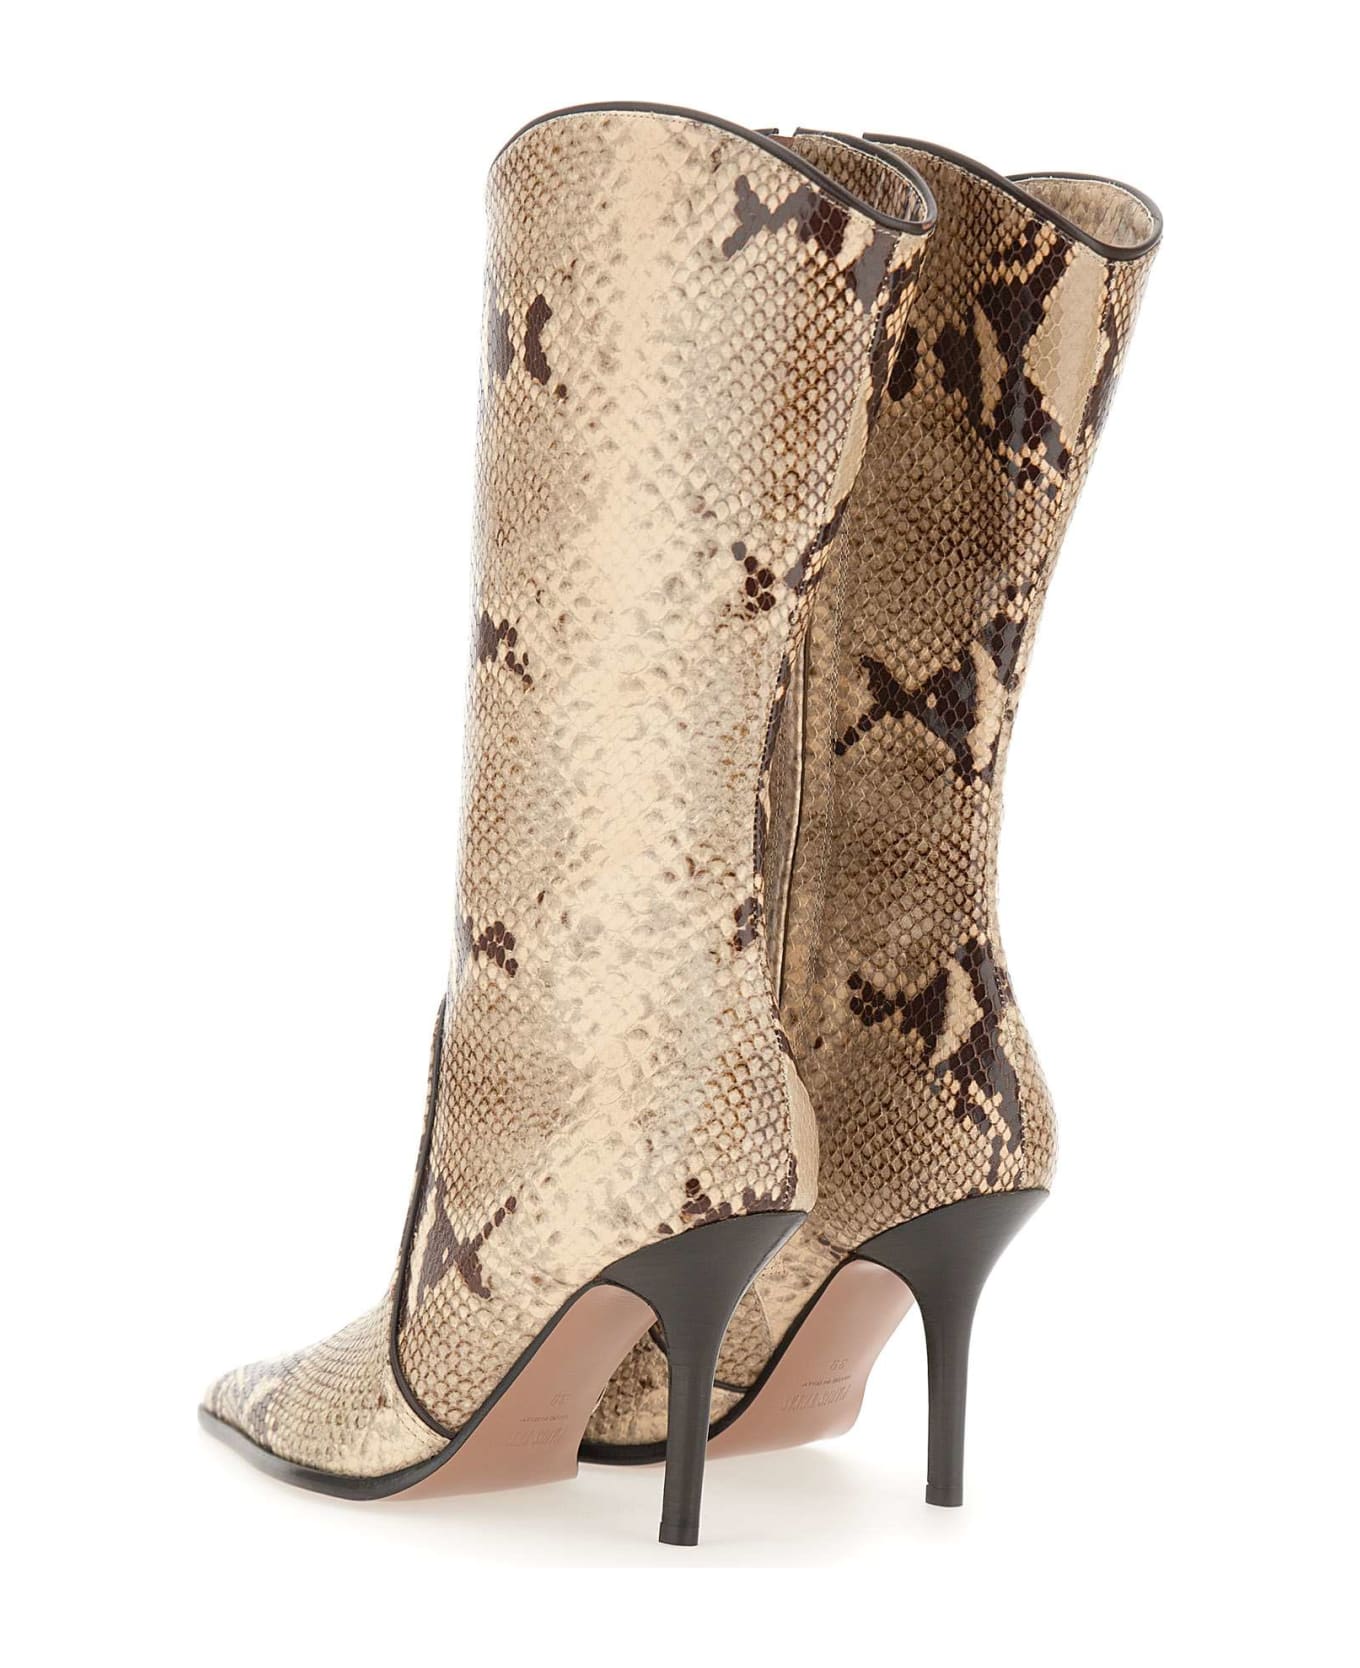 Paris Texas 'ahsley Midcalf' Leather Boots - BEIGE ブーツ